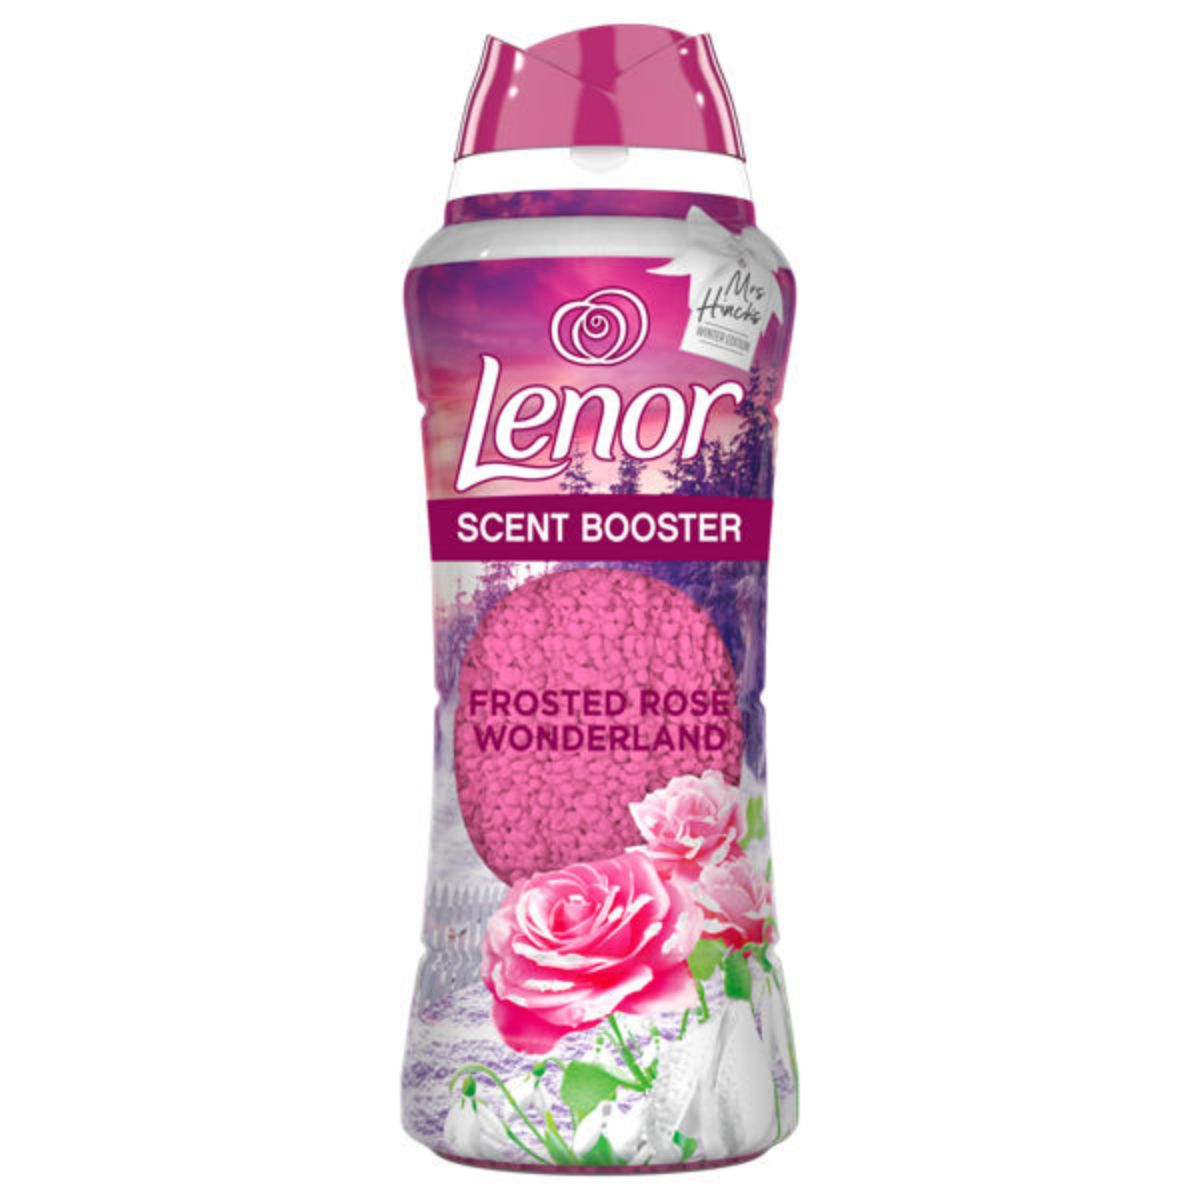 Lenor - Laundry Perfume In-Wash Scent Booster Beads - 570g pink roses 250 ml.